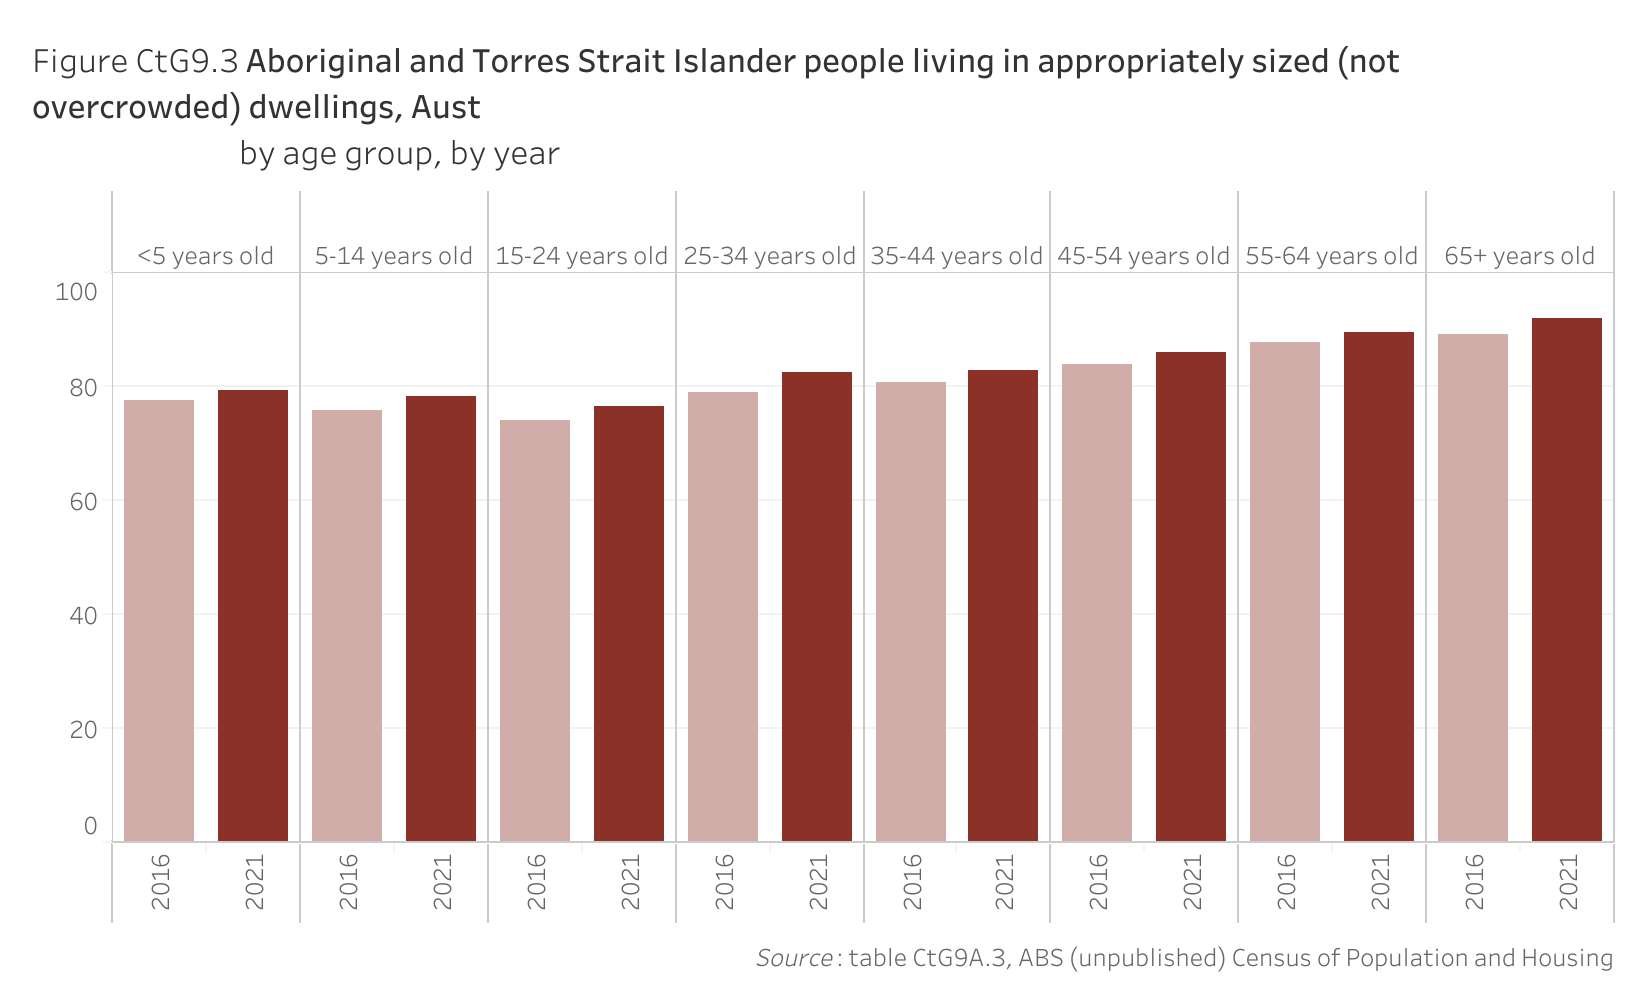 Figure CtG9.3 shows Aboriginal and Torres Strait Islander people living in appropriately sized (not overcrowded) dwellings, Australia, by age group, by year. More details can be found within the text near this image.